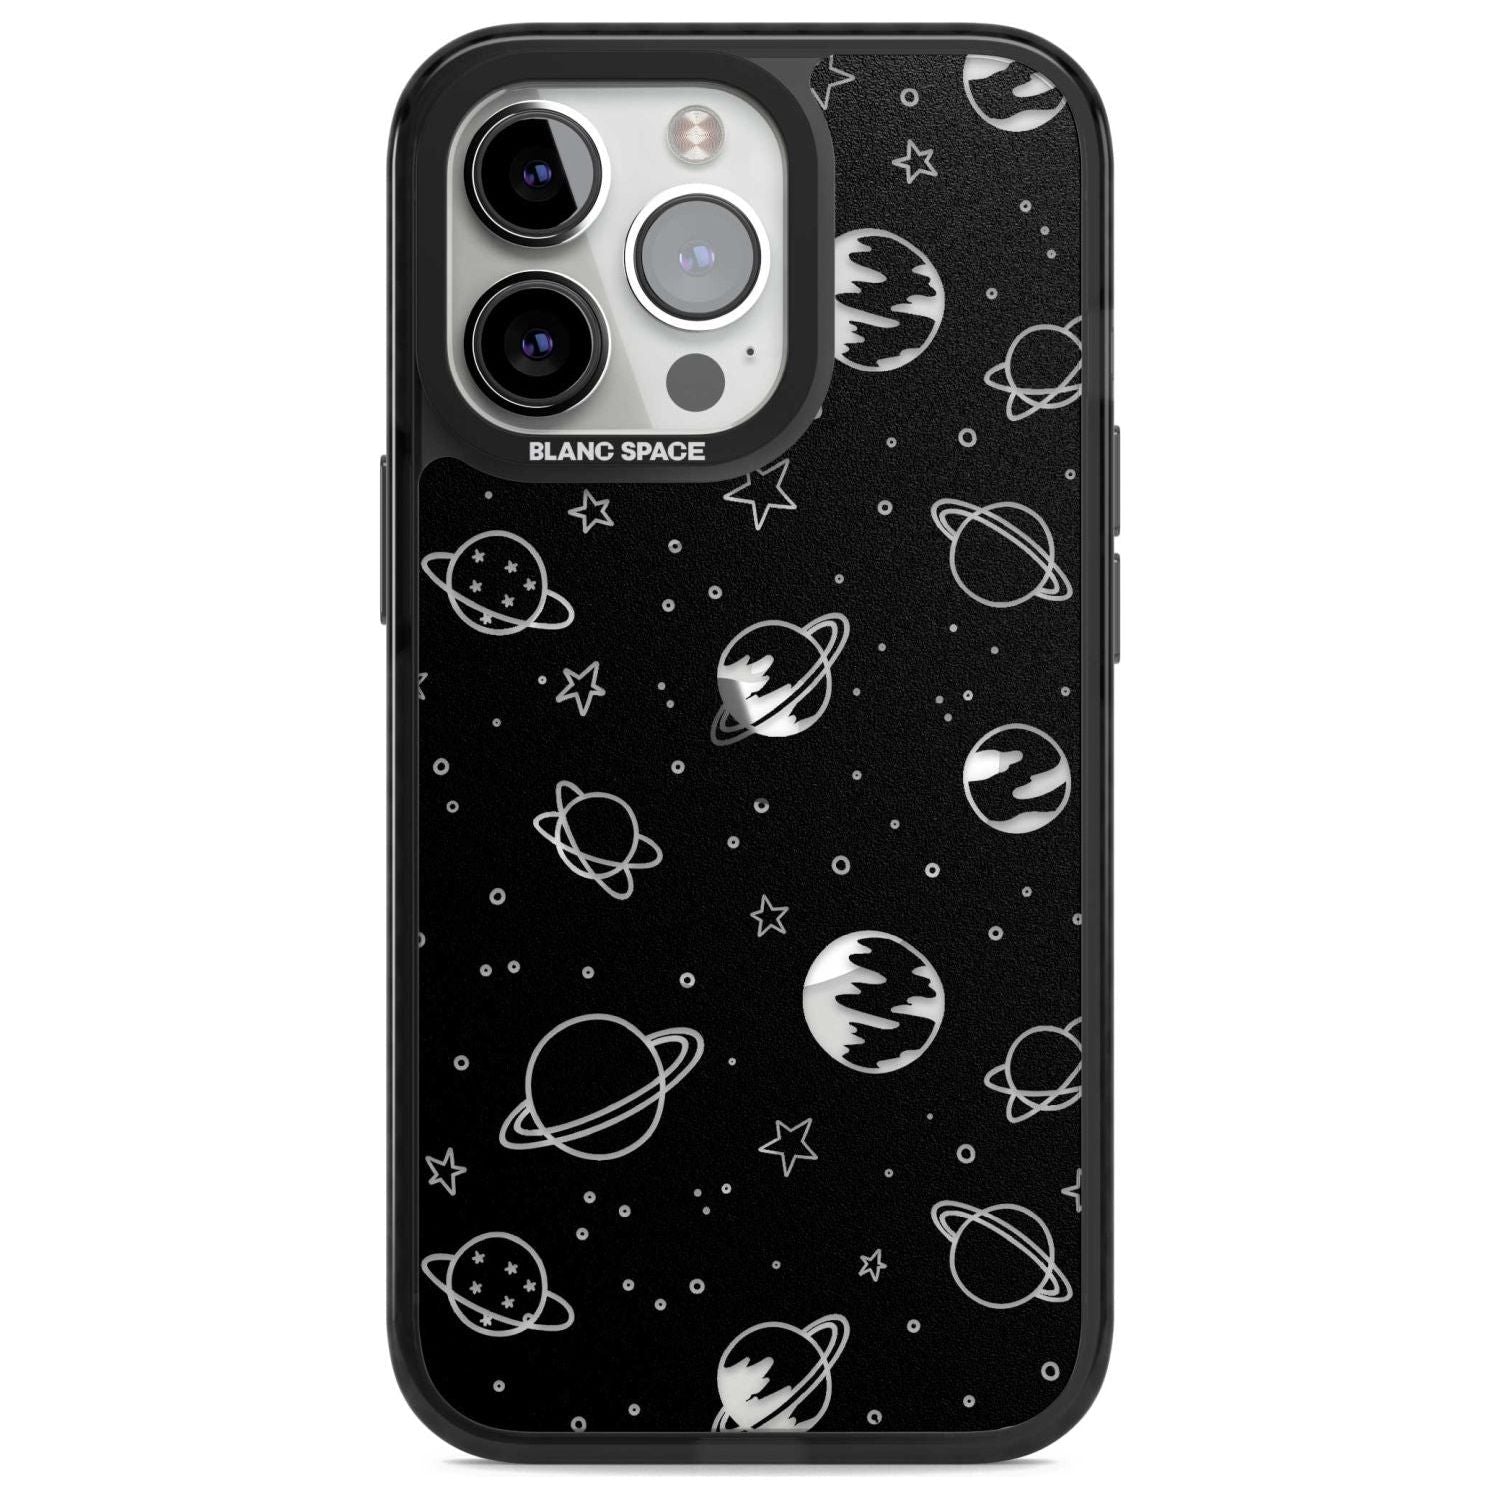 Cosmic Outer Space Design Clear on Black Phone Case iPhone 15 Pro Max / Magsafe Black Impact Case,iPhone 15 Pro / Magsafe Black Impact Case,iPhone 14 Pro Max / Magsafe Black Impact Case,iPhone 14 Pro / Magsafe Black Impact Case,iPhone 13 Pro / Magsafe Black Impact Case Blanc Space